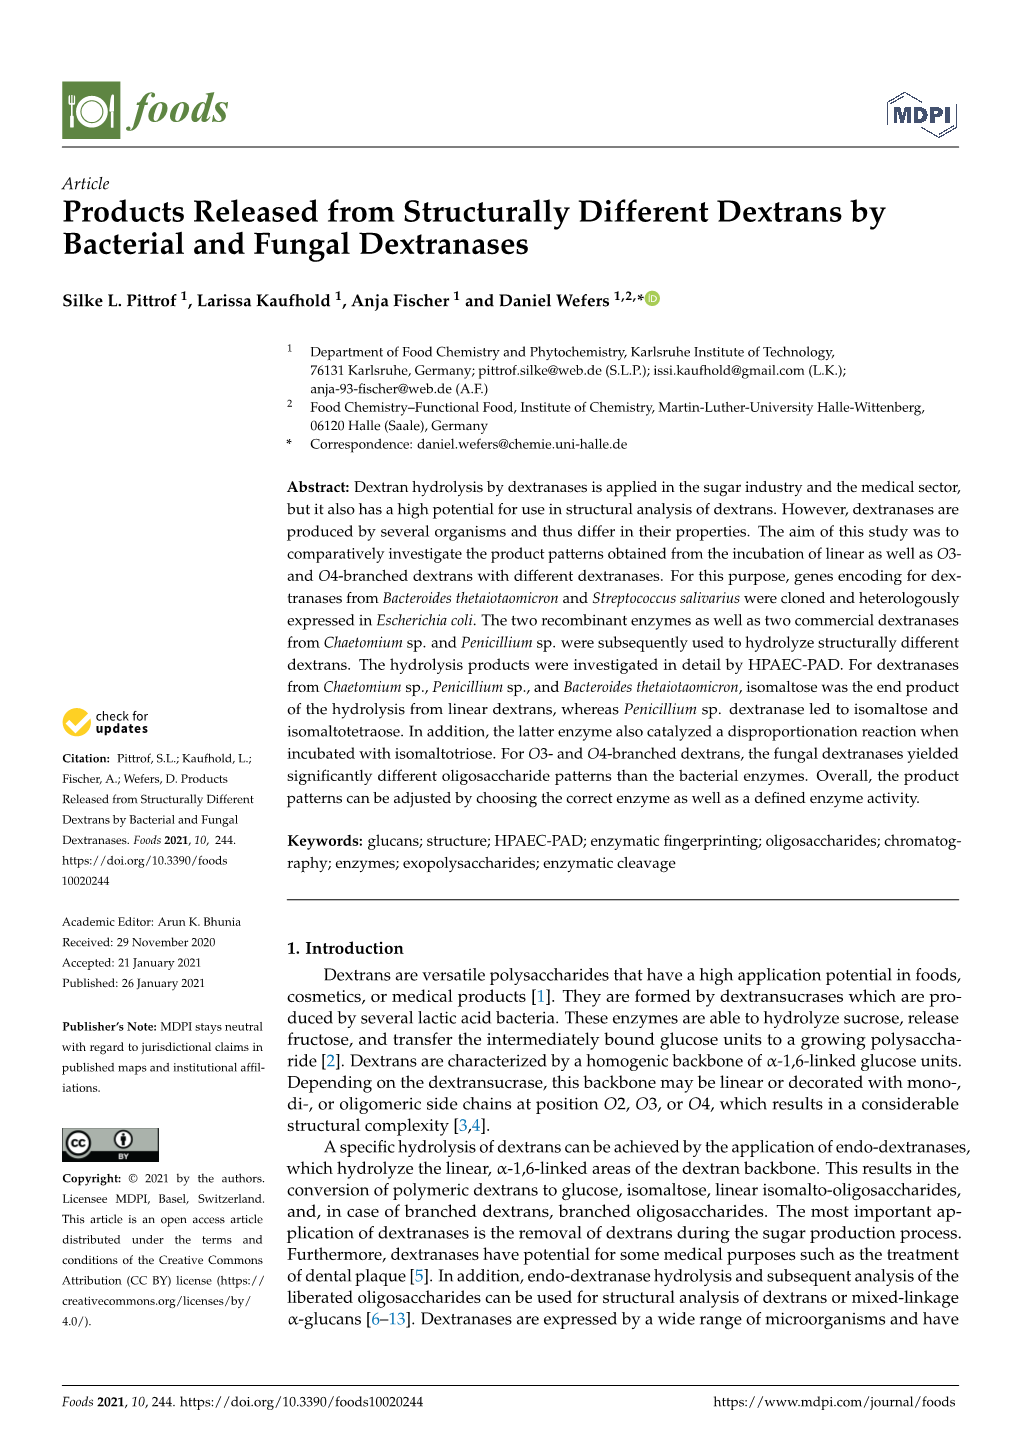 Products Released from Structurally Different Dextrans by Bacterial and Fungal Dextranases